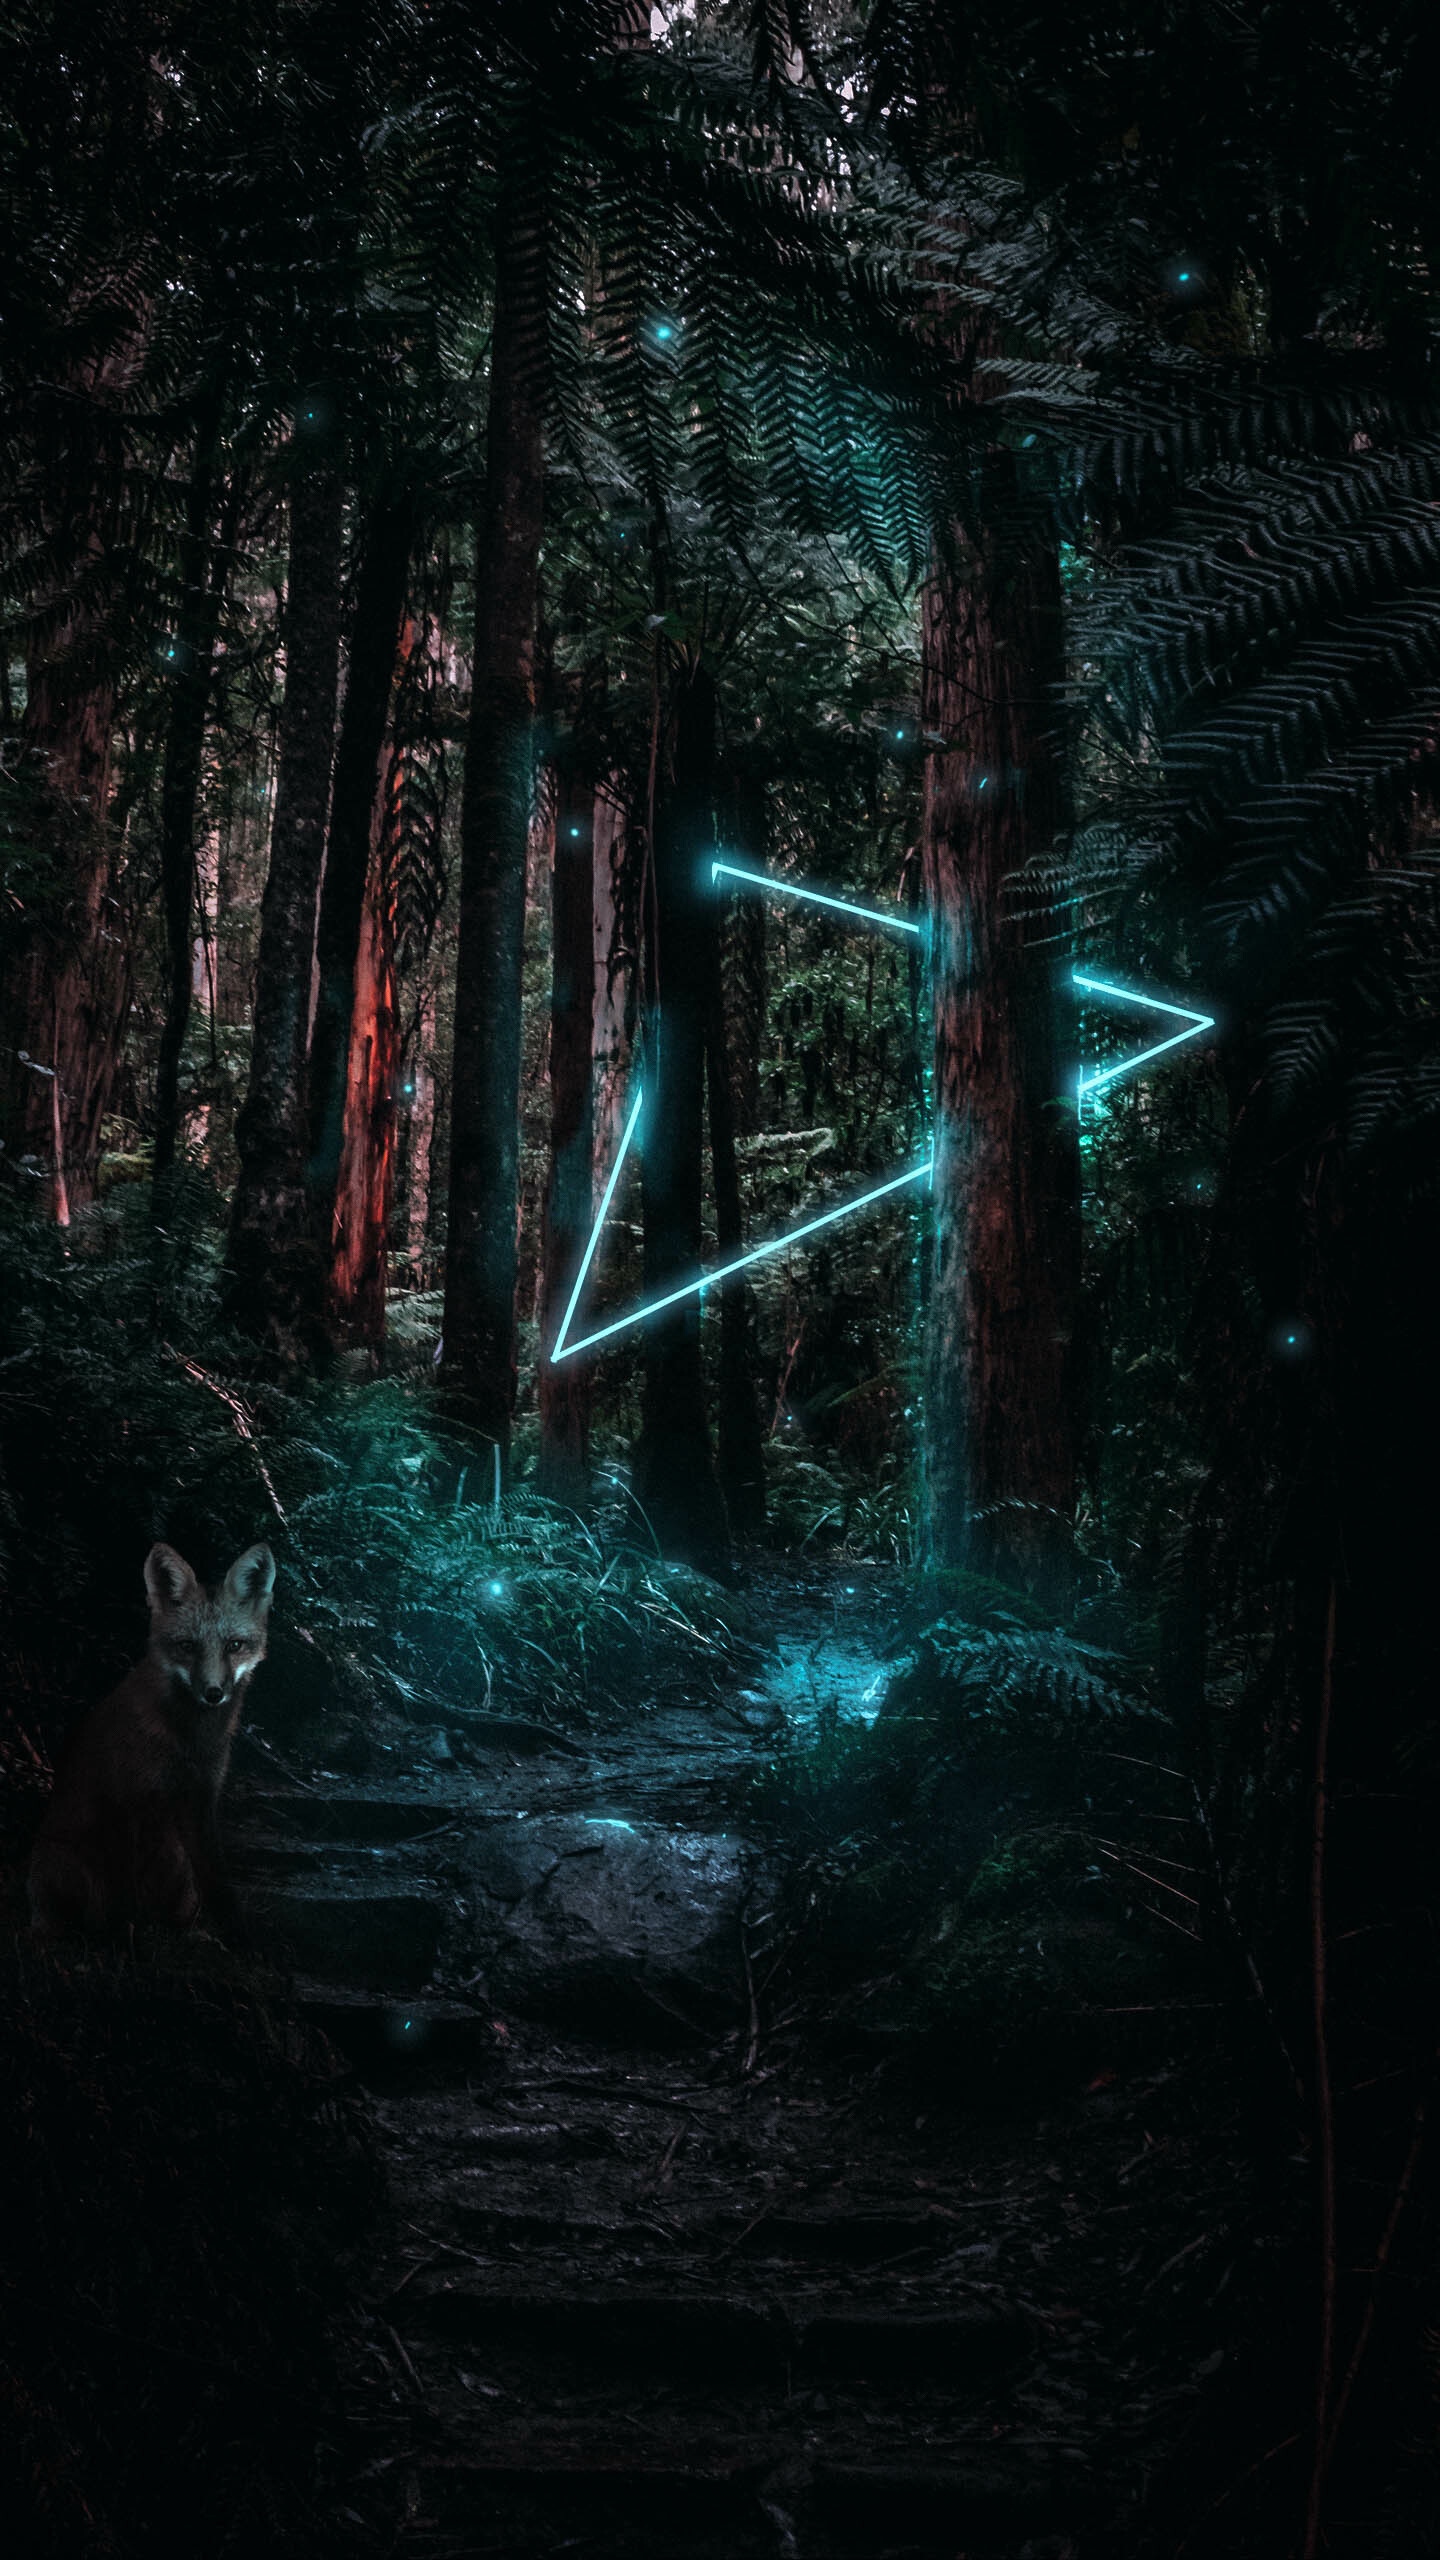 80318 download wallpaper magic, fox, shine, light, miscellanea, miscellaneous, forest, triangle screensavers and pictures for free